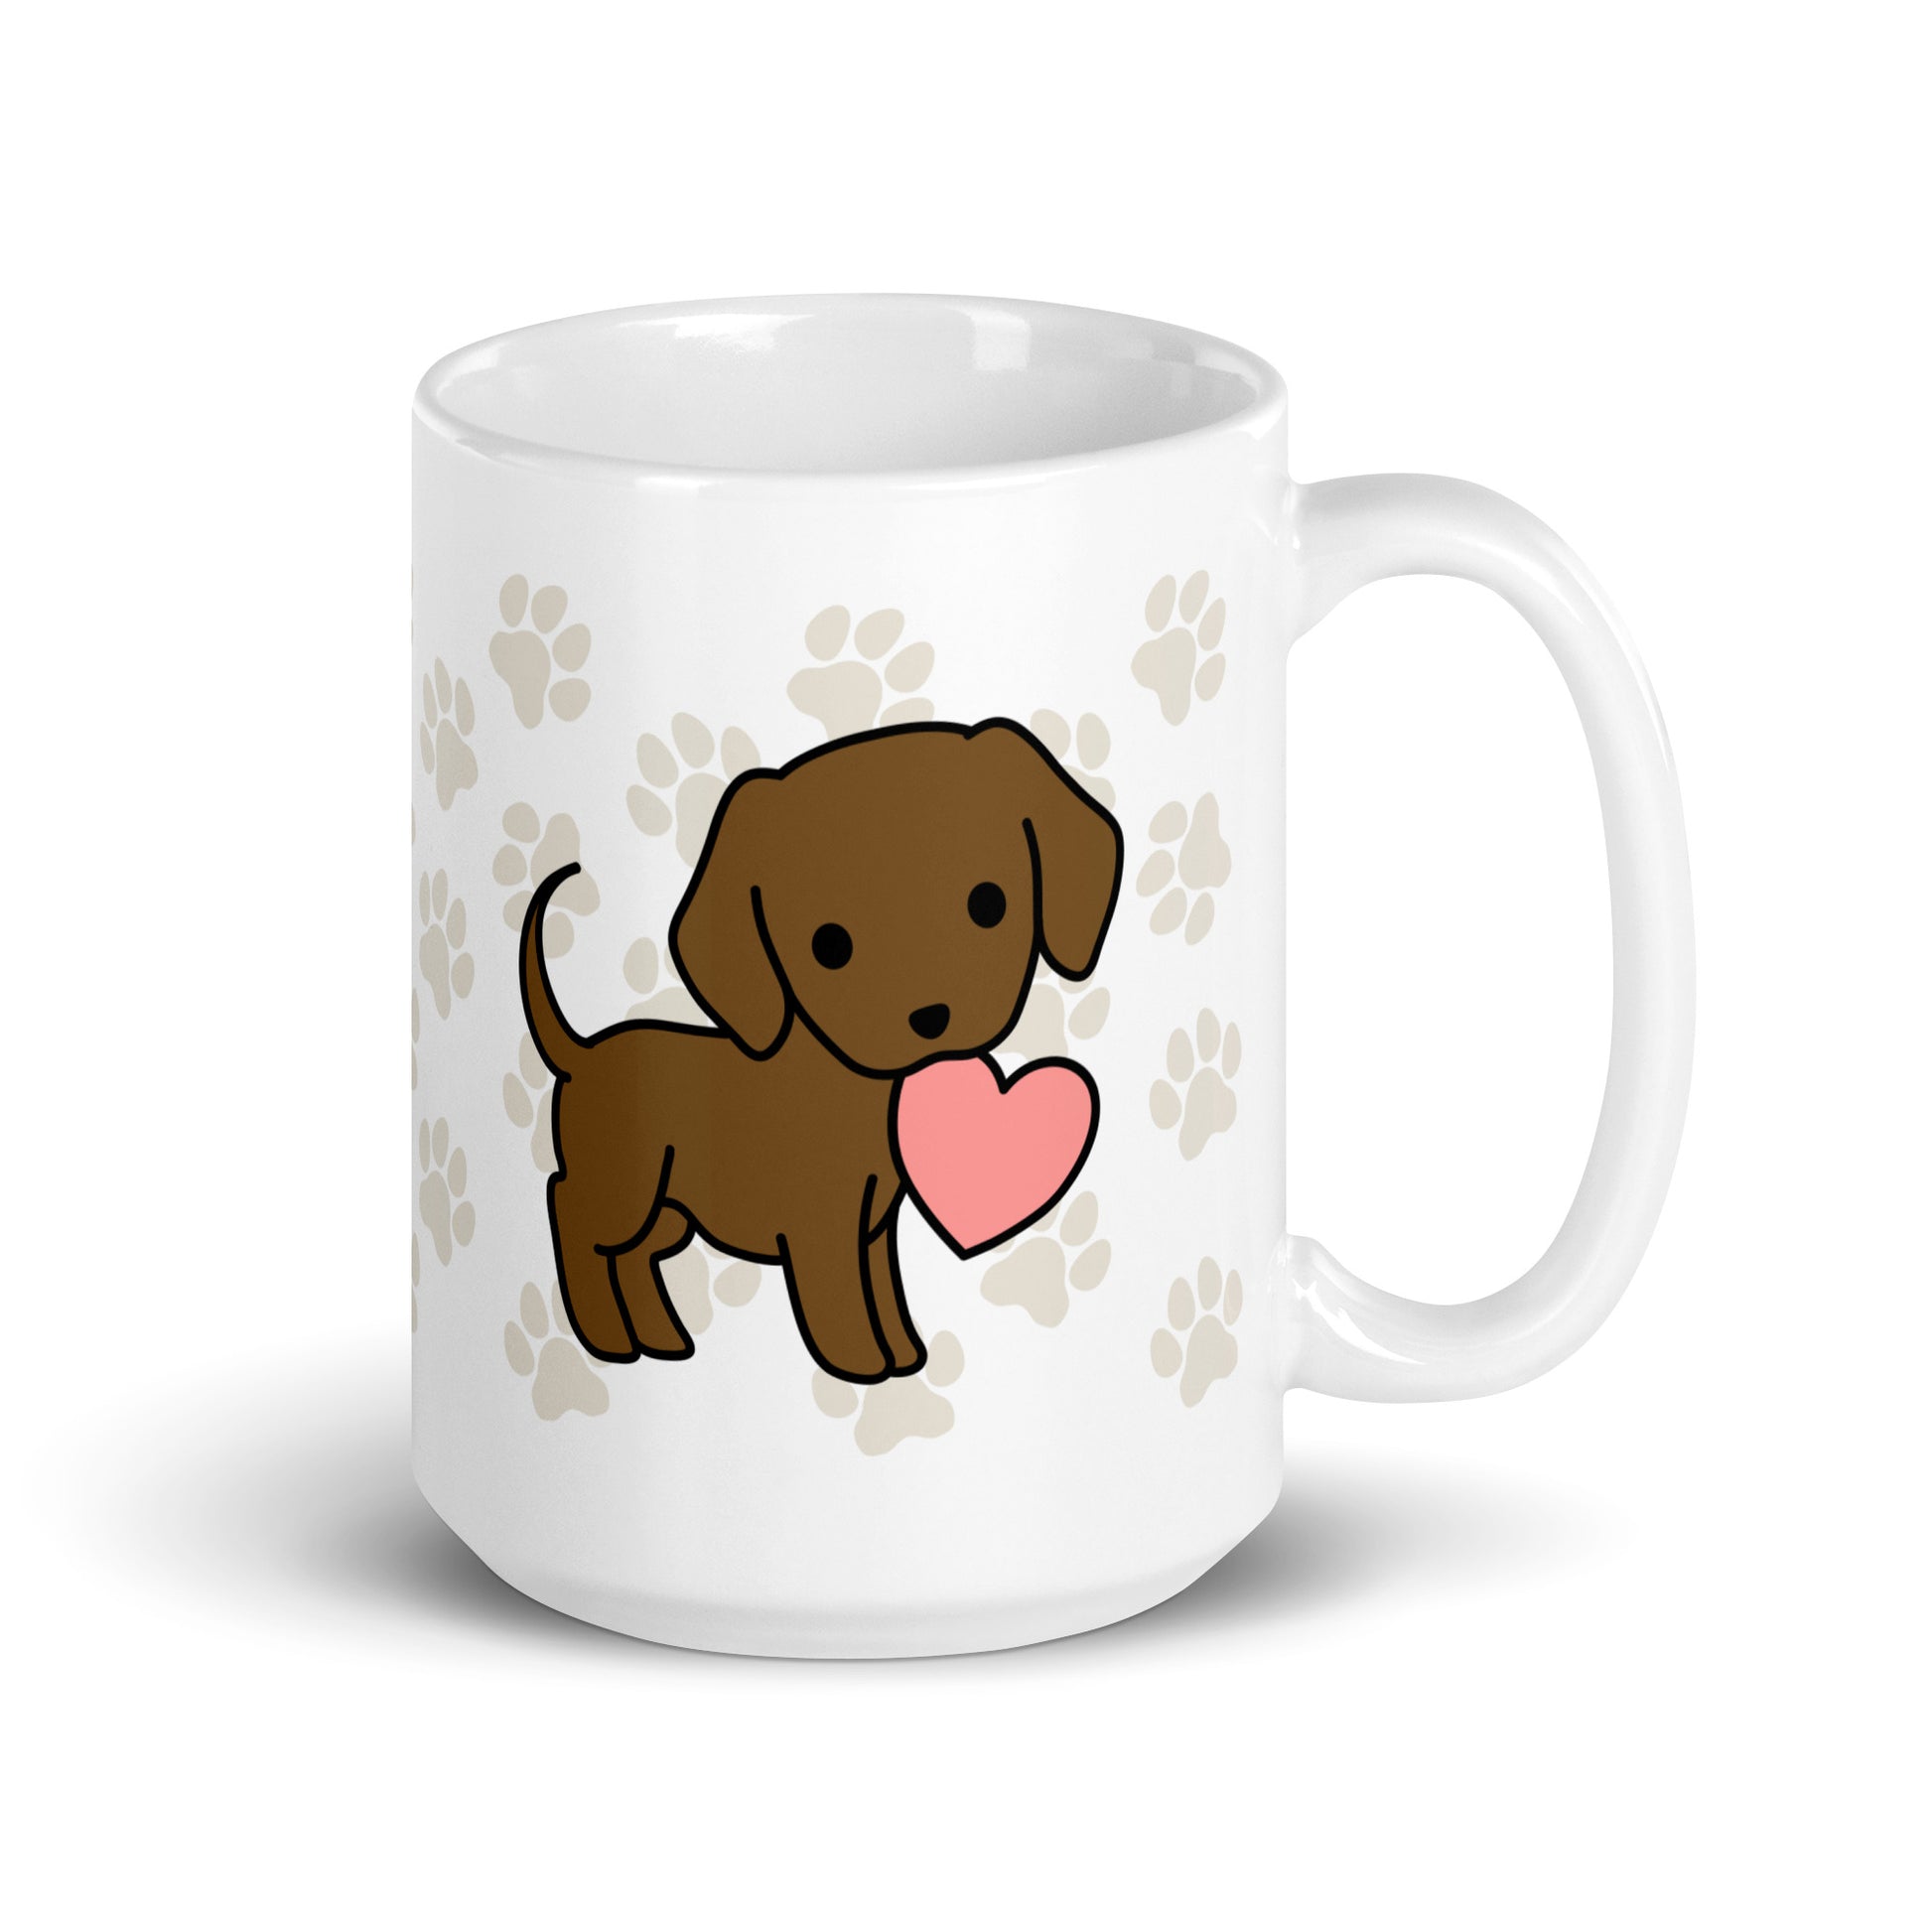 A white 15 ounce ceramic mug with a pattern of light brown pawprints all over. The mug also features a stylized illustration of a Chocolate Lab holding a heart in its mouth.